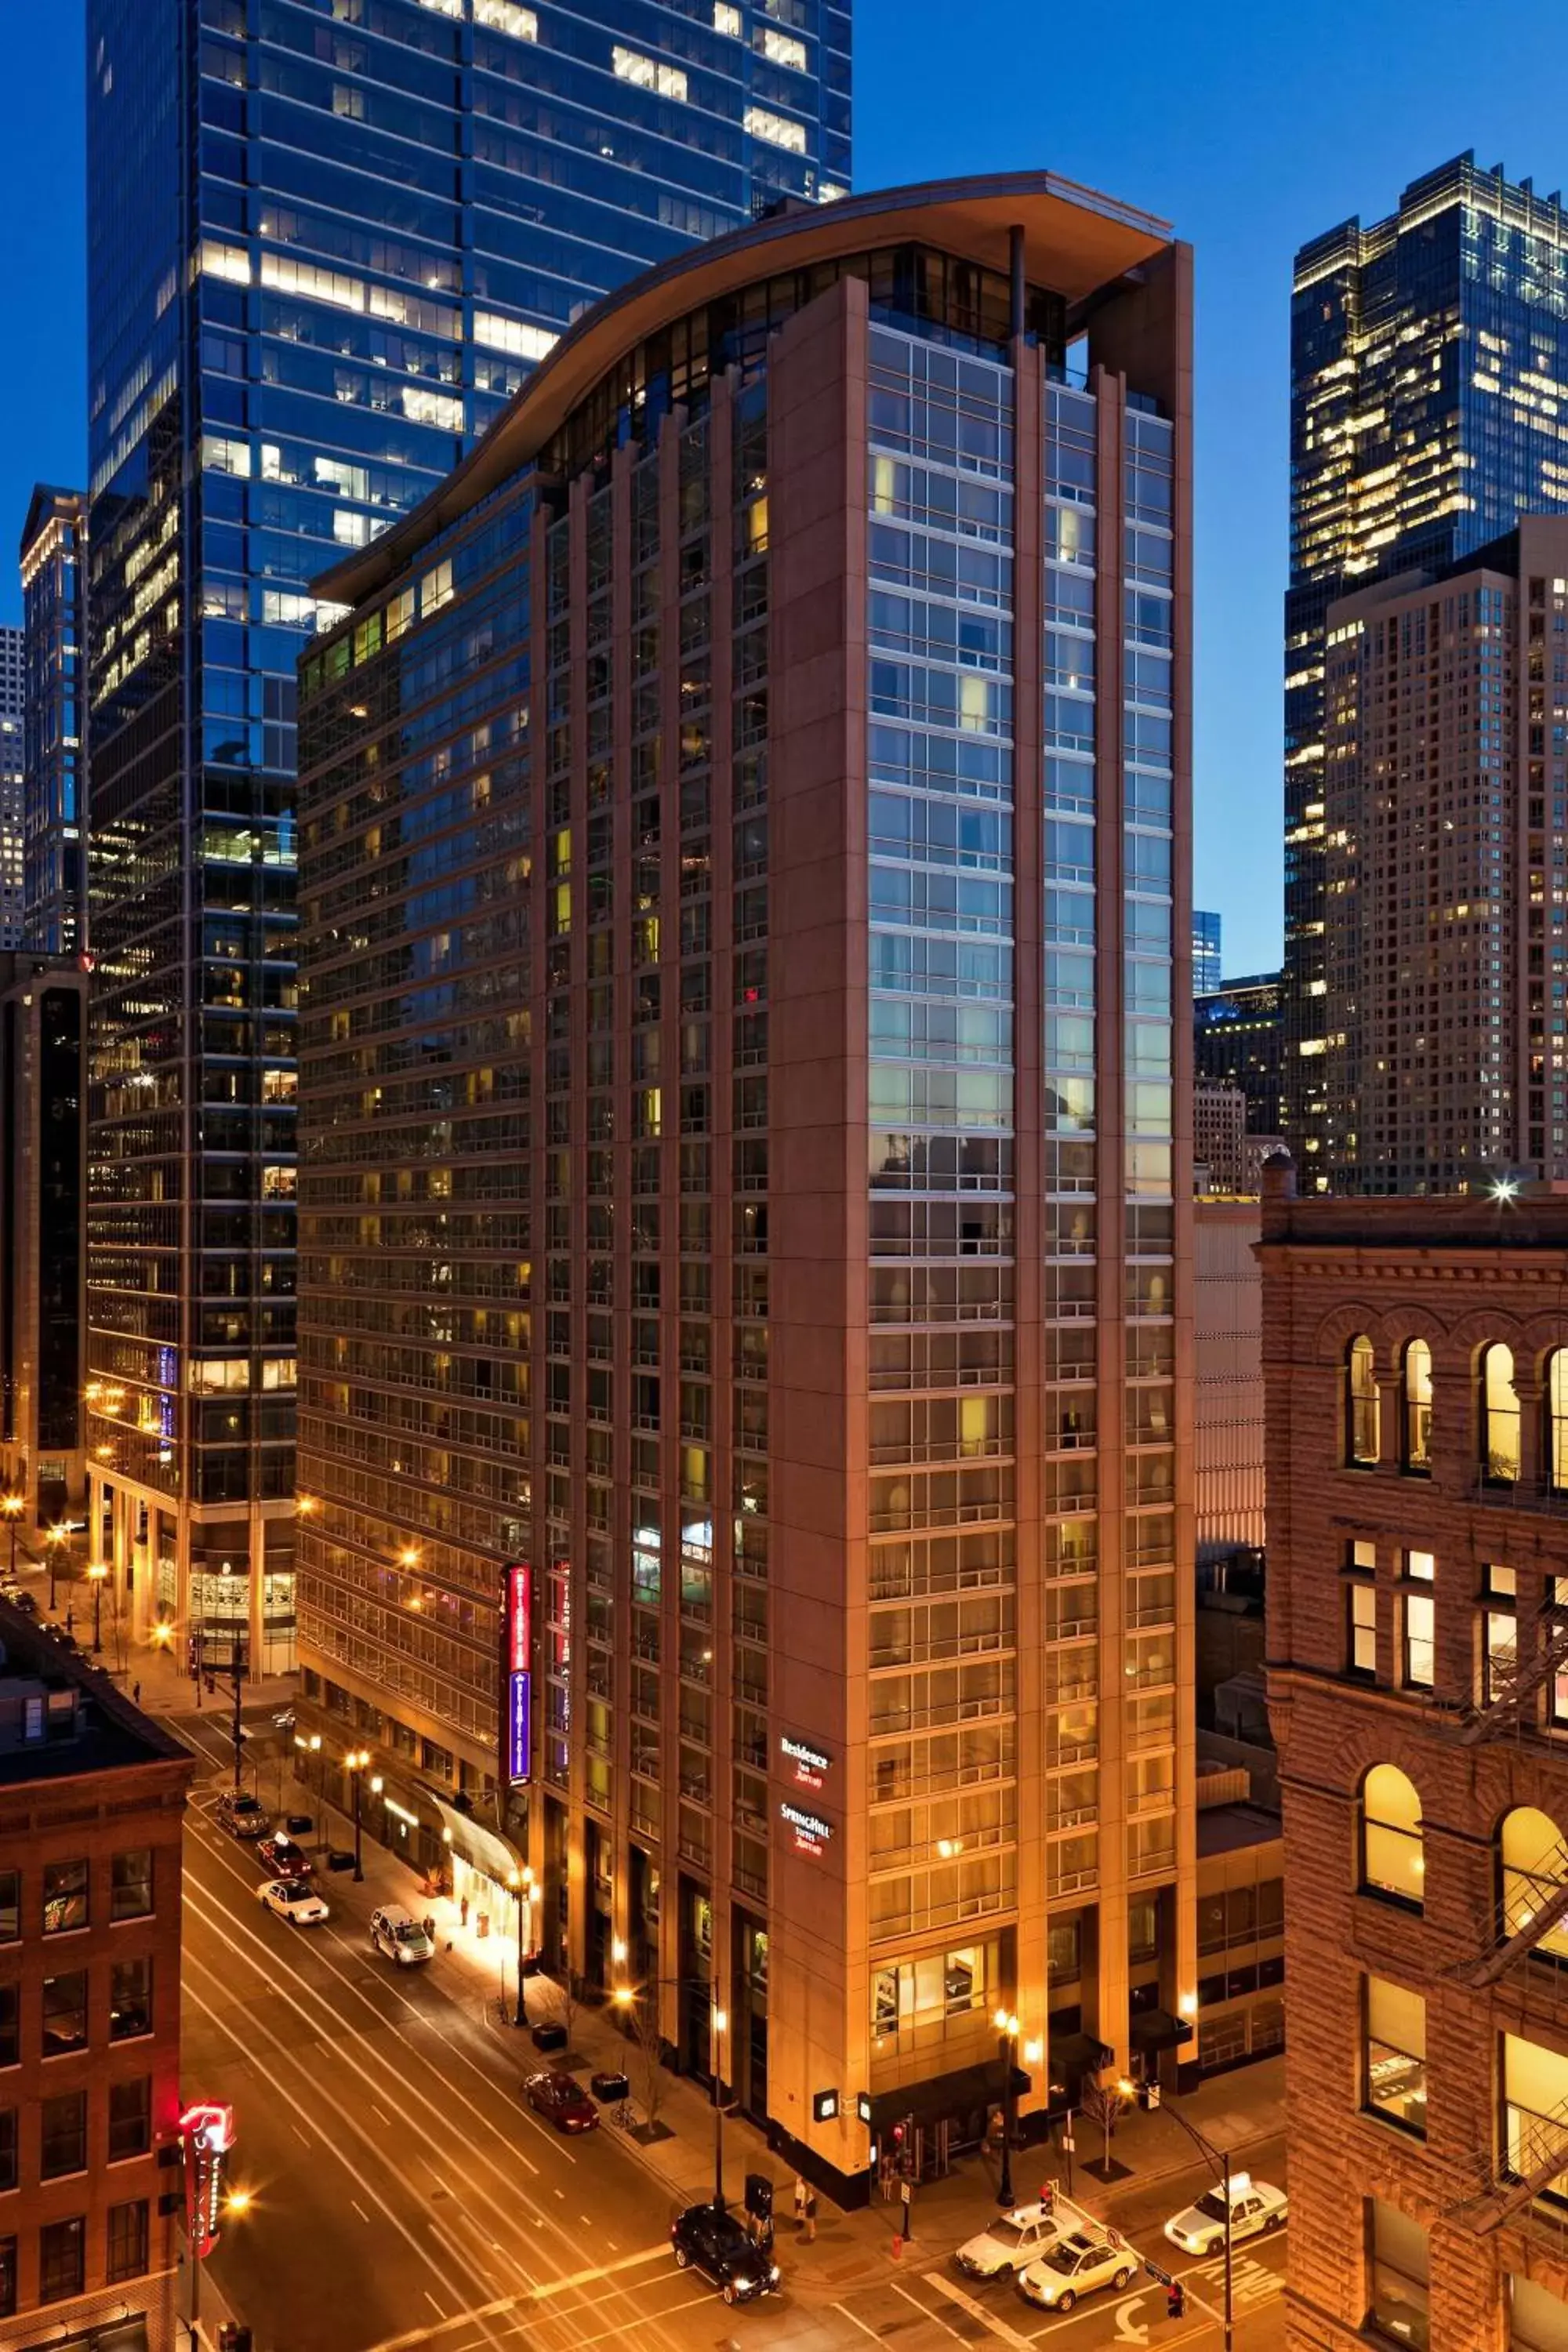 Property building in Residence Inn by Marriott Chicago Downtown/River North